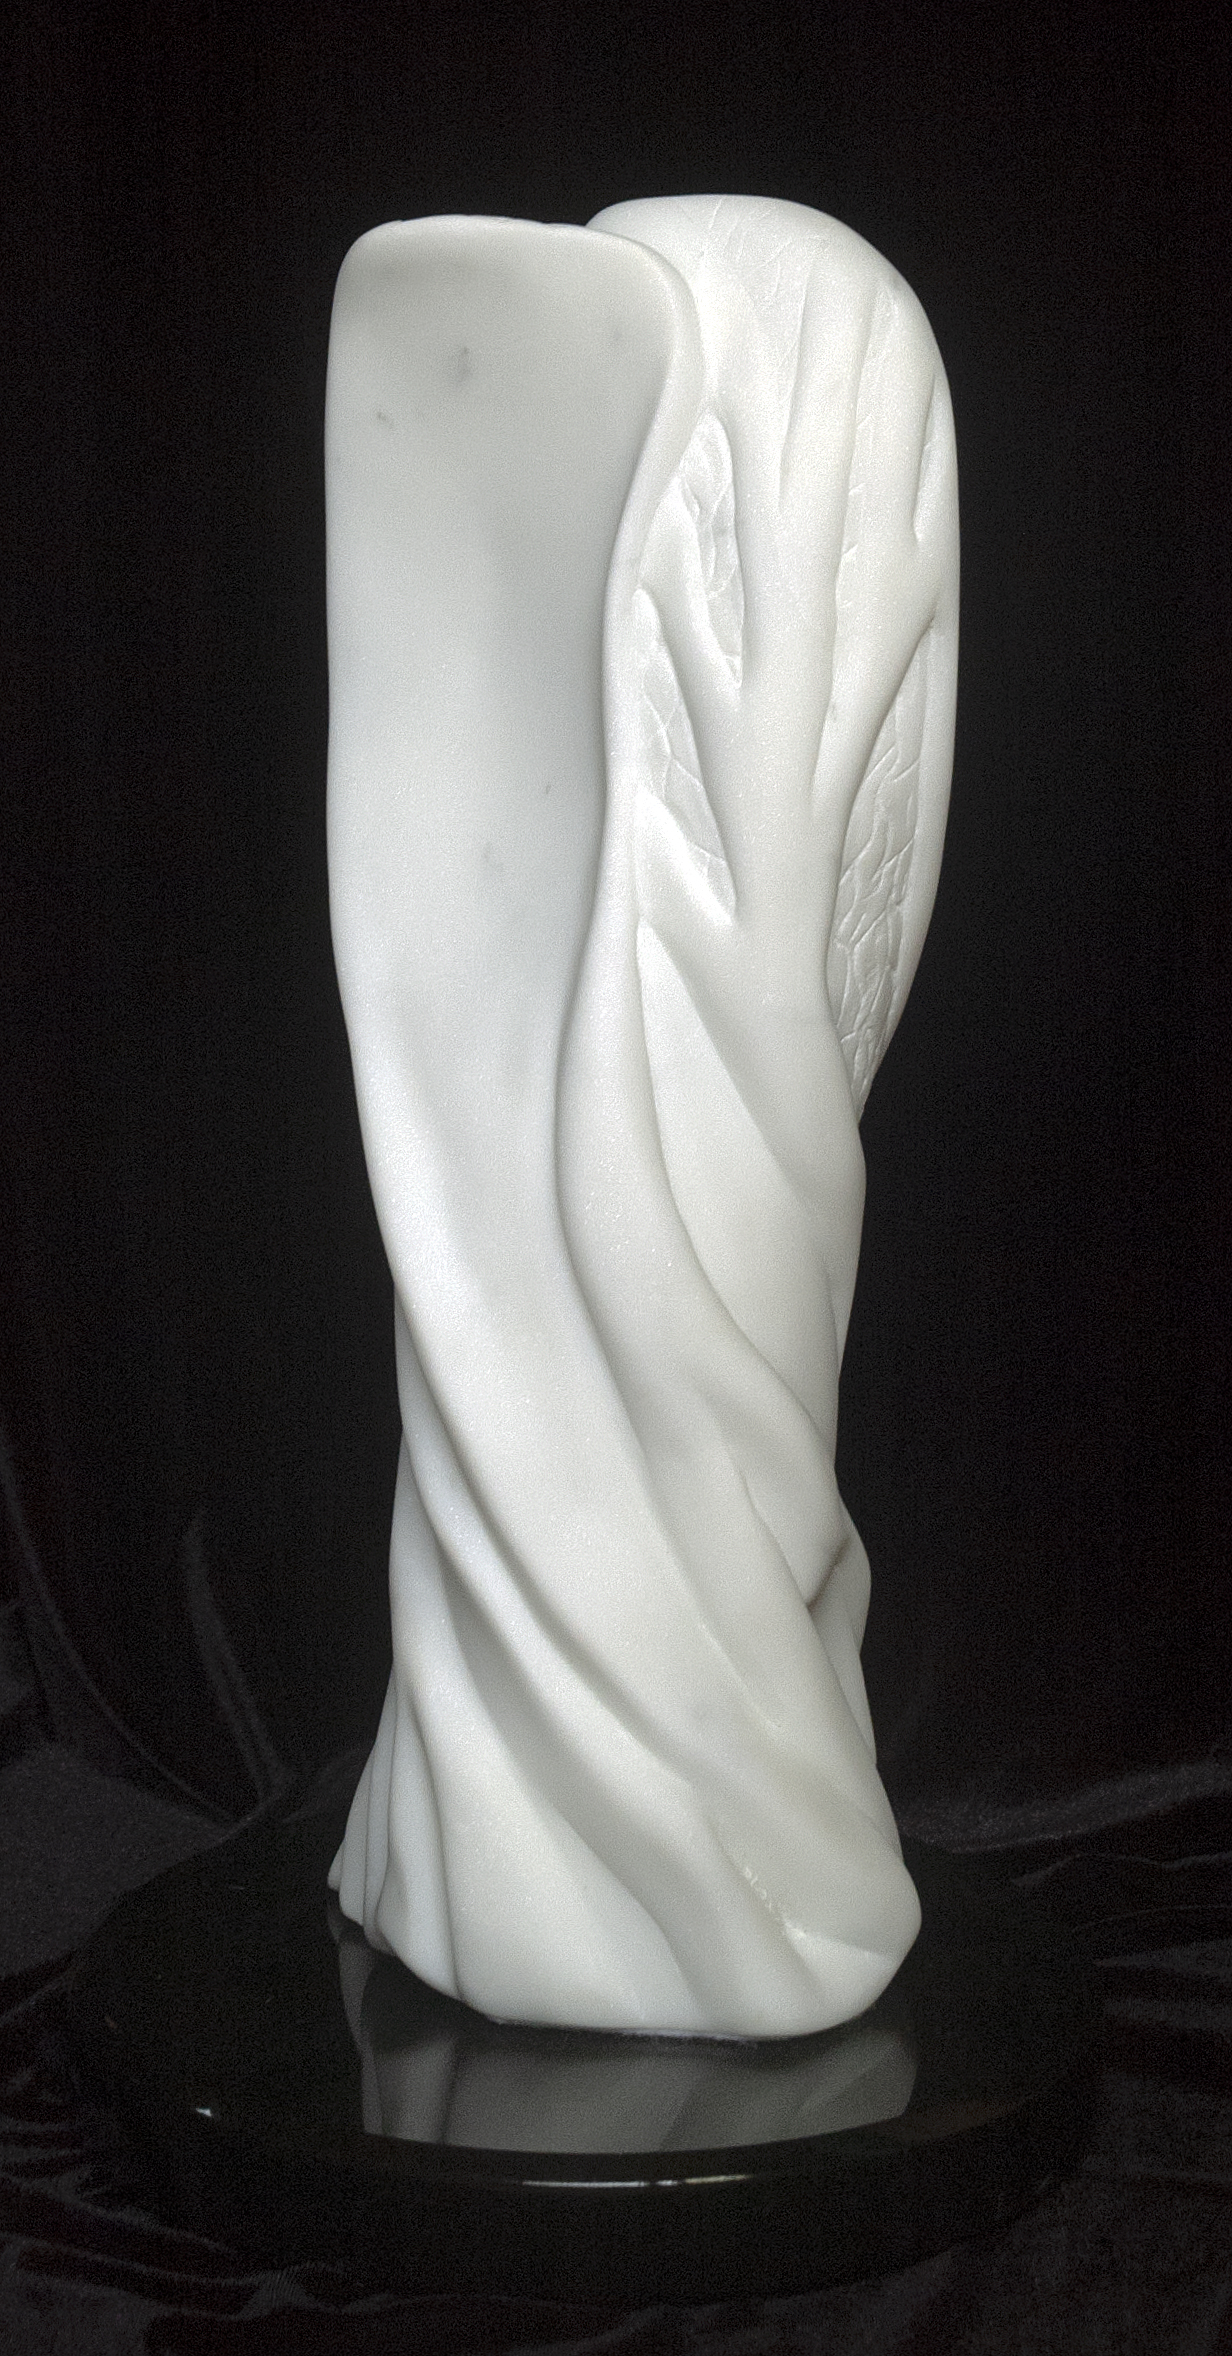 Transfiguration 2012 Carrara Marble and Black Onyx 18.5in tall 2nd